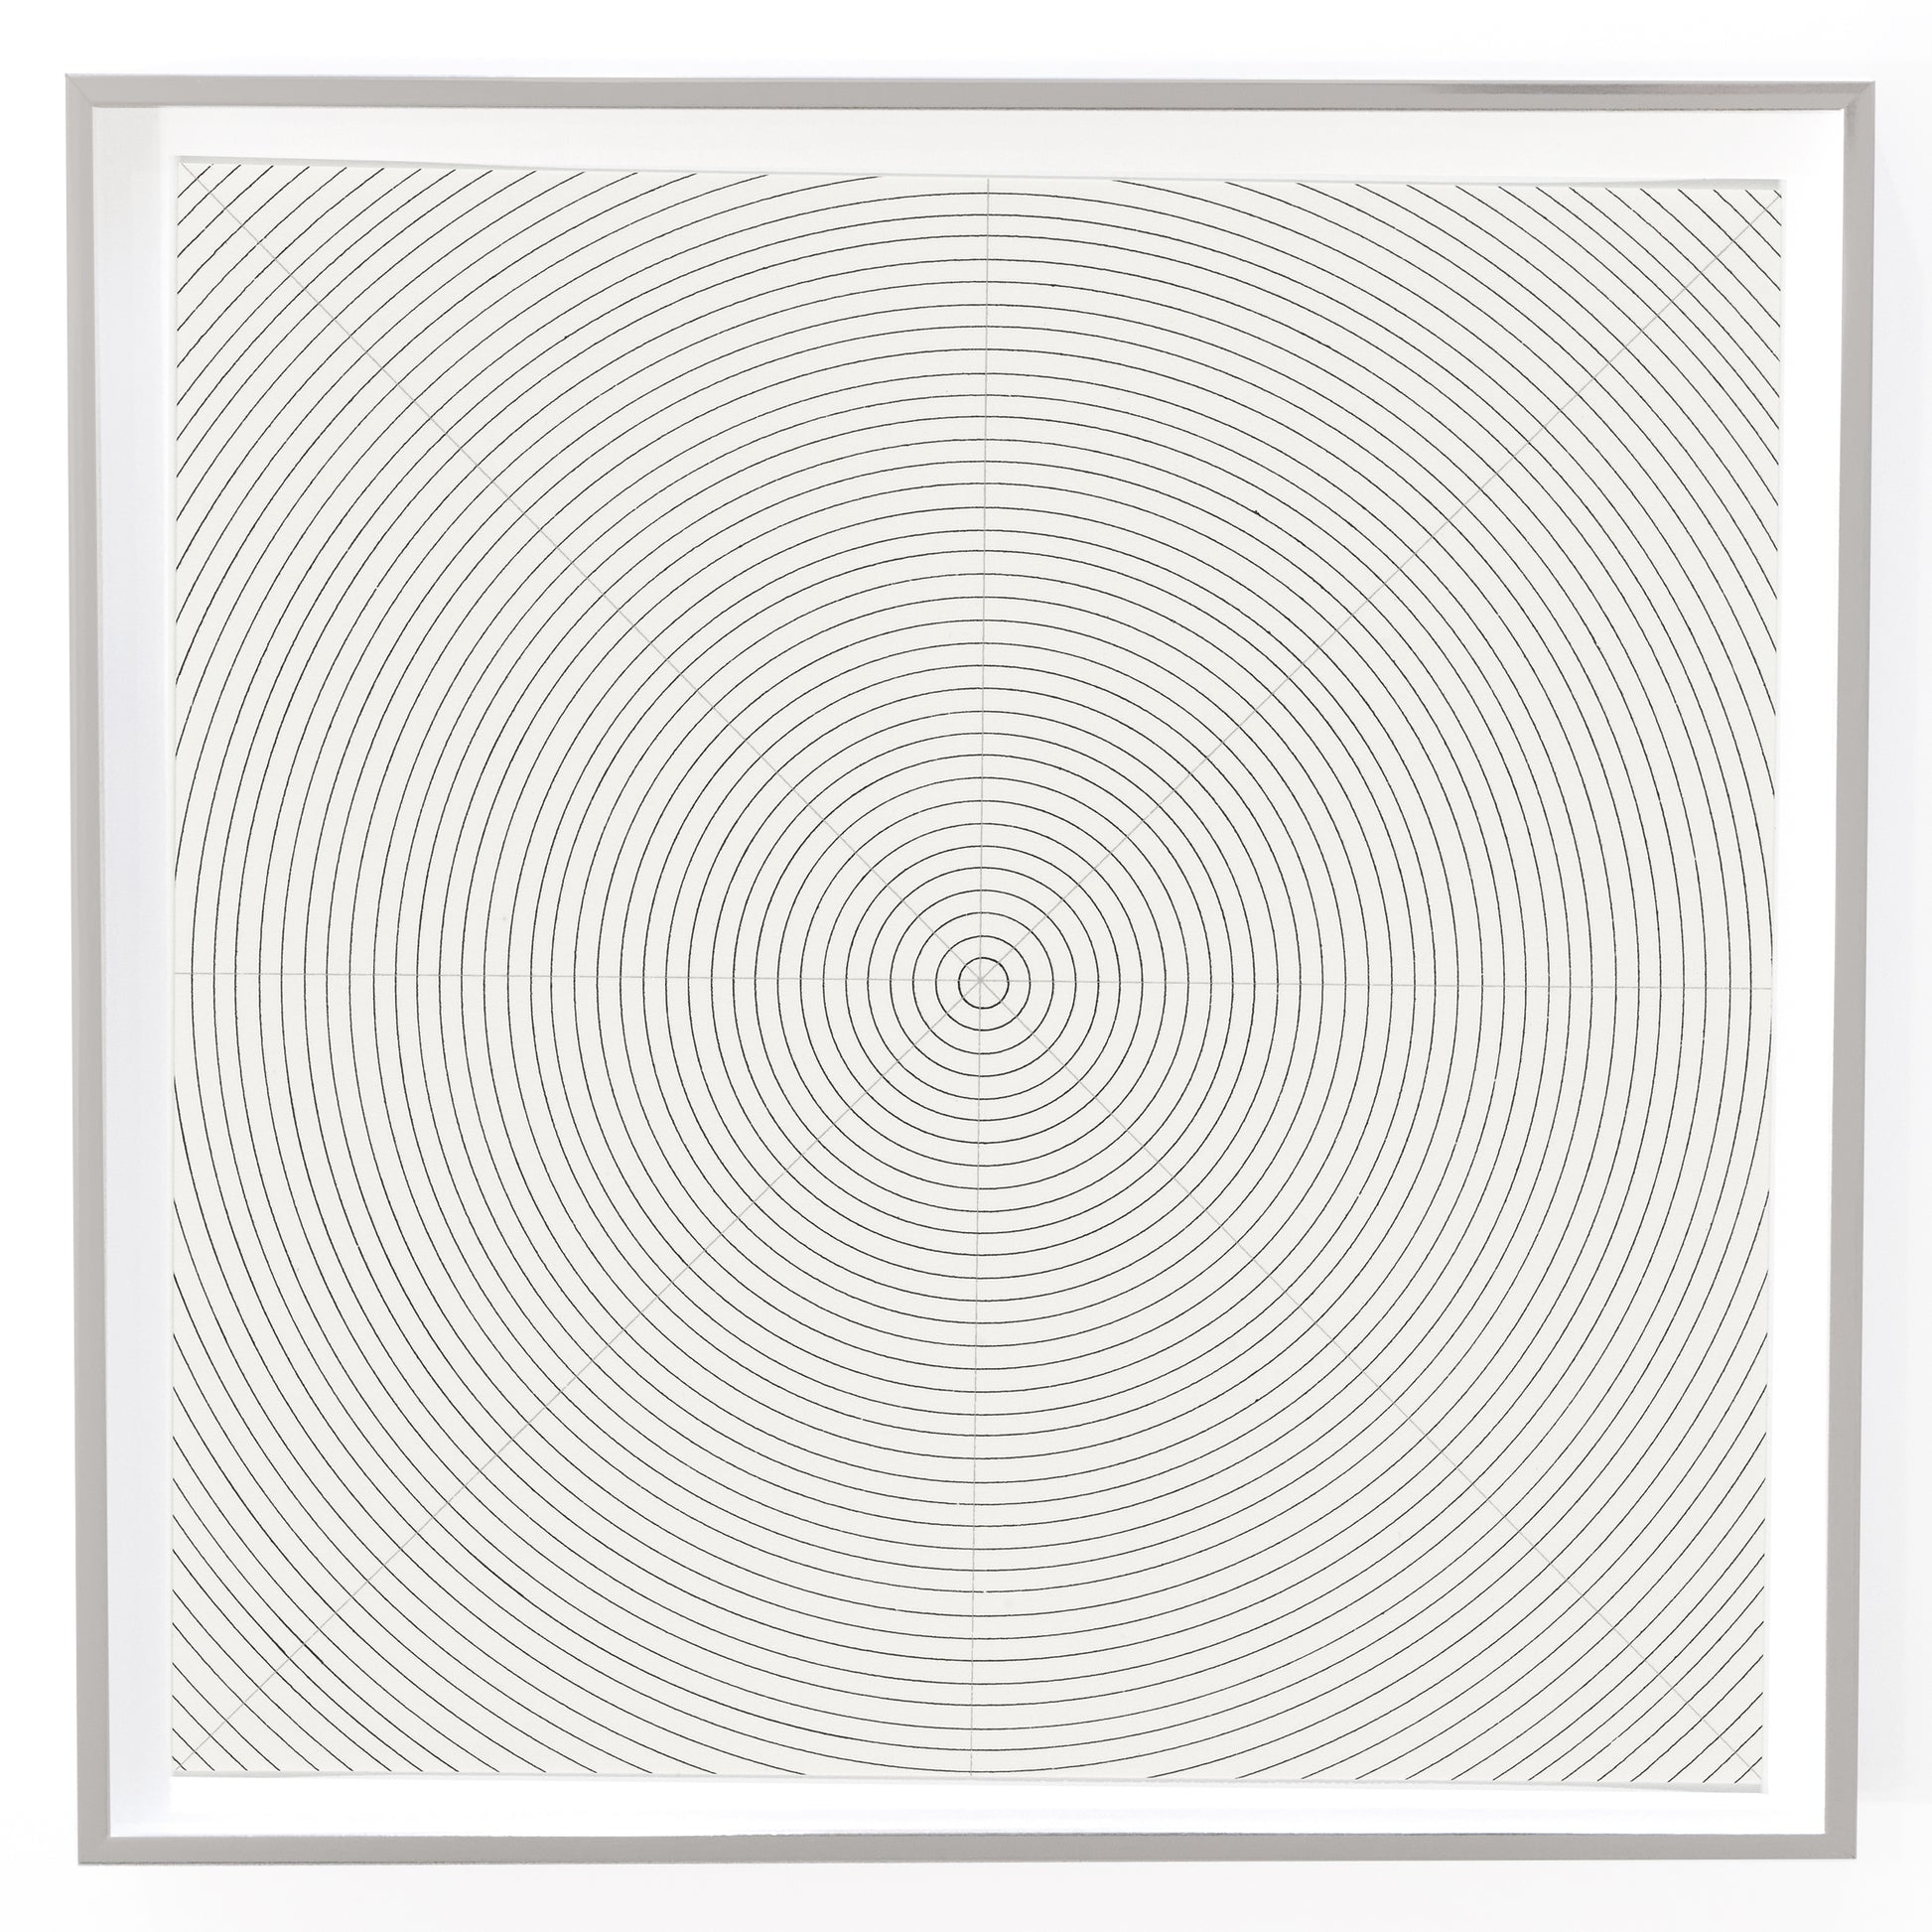 Sol Lewitt Circles, 1973 Lithograph Signed Numbered Ltd Ed Framed